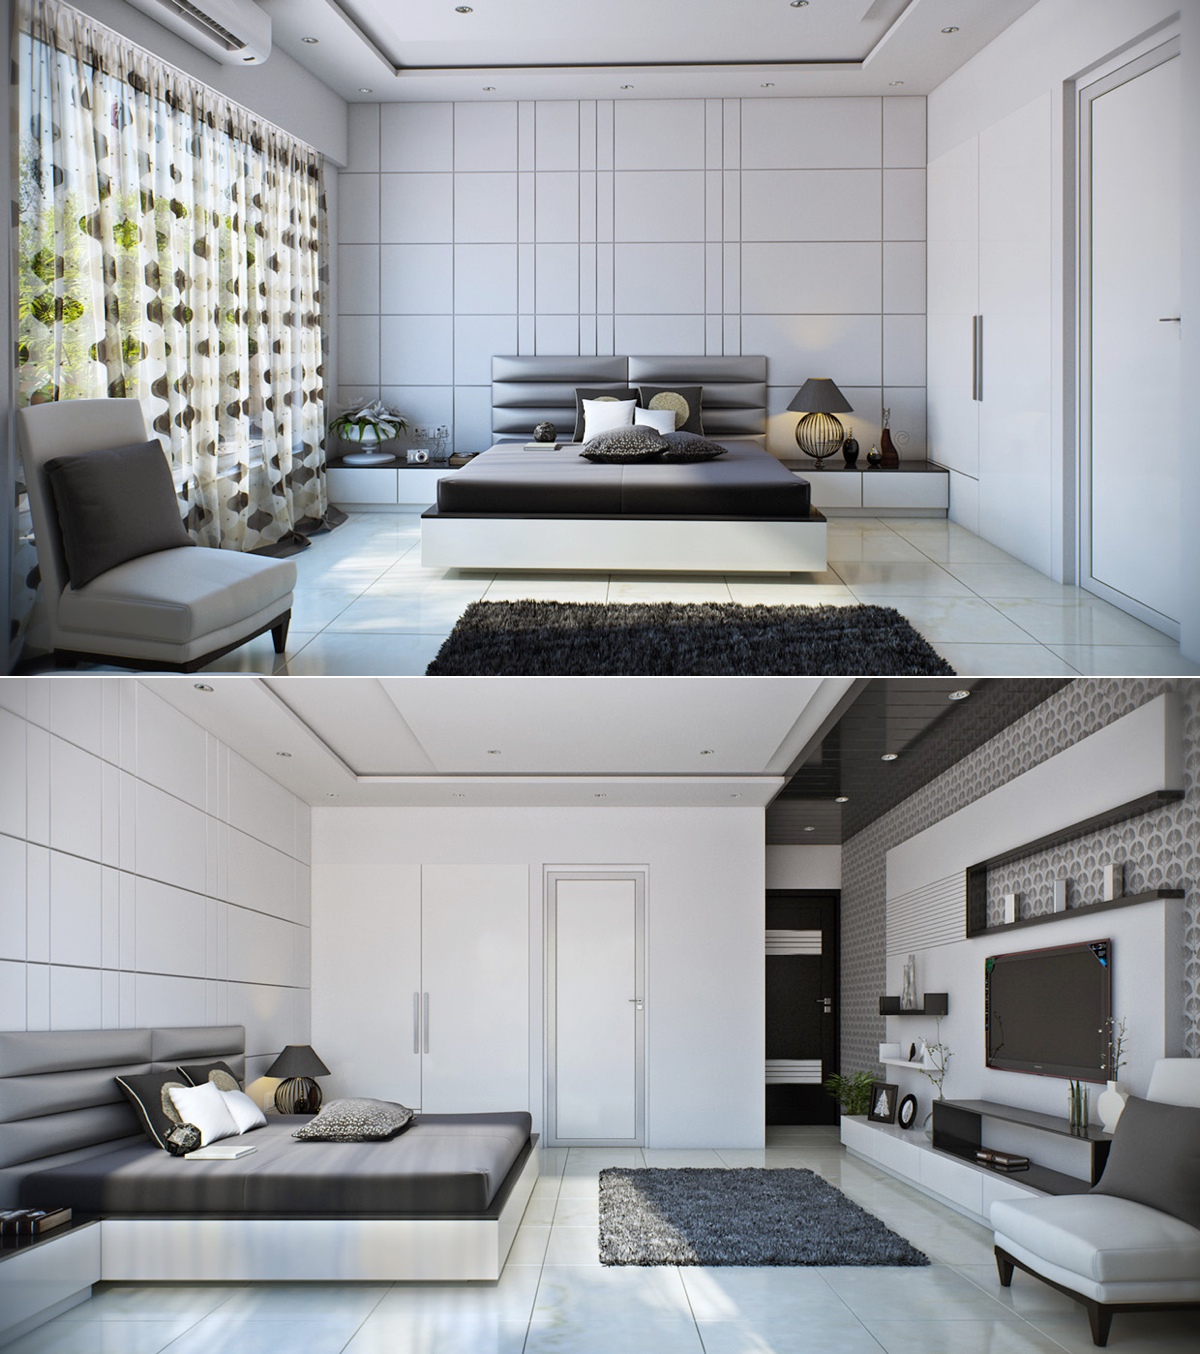 white modern bedroom design "width =" 1200 "height =" 1354 "srcset =" https://mileray.com/wp-content/uploads/2020/05/1588509232_729_Applying-Modern-Bedroom-Designs-Below-Decorated-With-a-Variety-of.jpeg 1200w, https: // myfashionos. com / wp-content / uploads / 2016/09 / Image-Box-Studio-266x300.jpeg 266w, https://mileray.com/wp-content/uploads/2016/09/Image-Box-Studio-768x867. jpeg 768w, https://mileray.com/wp-content/uploads/2016/09/Image-Box-Studio-908x1024.jpeg 908w, https://mileray.com/wp-content/uploads/2016/09/ Image-Box-Studio-696x785.jpeg 696w, https://mileray.com/wp-content/uploads/2016/09/Image-Box-Studio-1068x1205.jpeg 1068w, https://mileray.com/wp- Content / Uploads / 2016/09 / Image-Box-Studio-372x420.jpeg 372w "Sizes =" (maximum width: 1200px) 100vw, 1200px